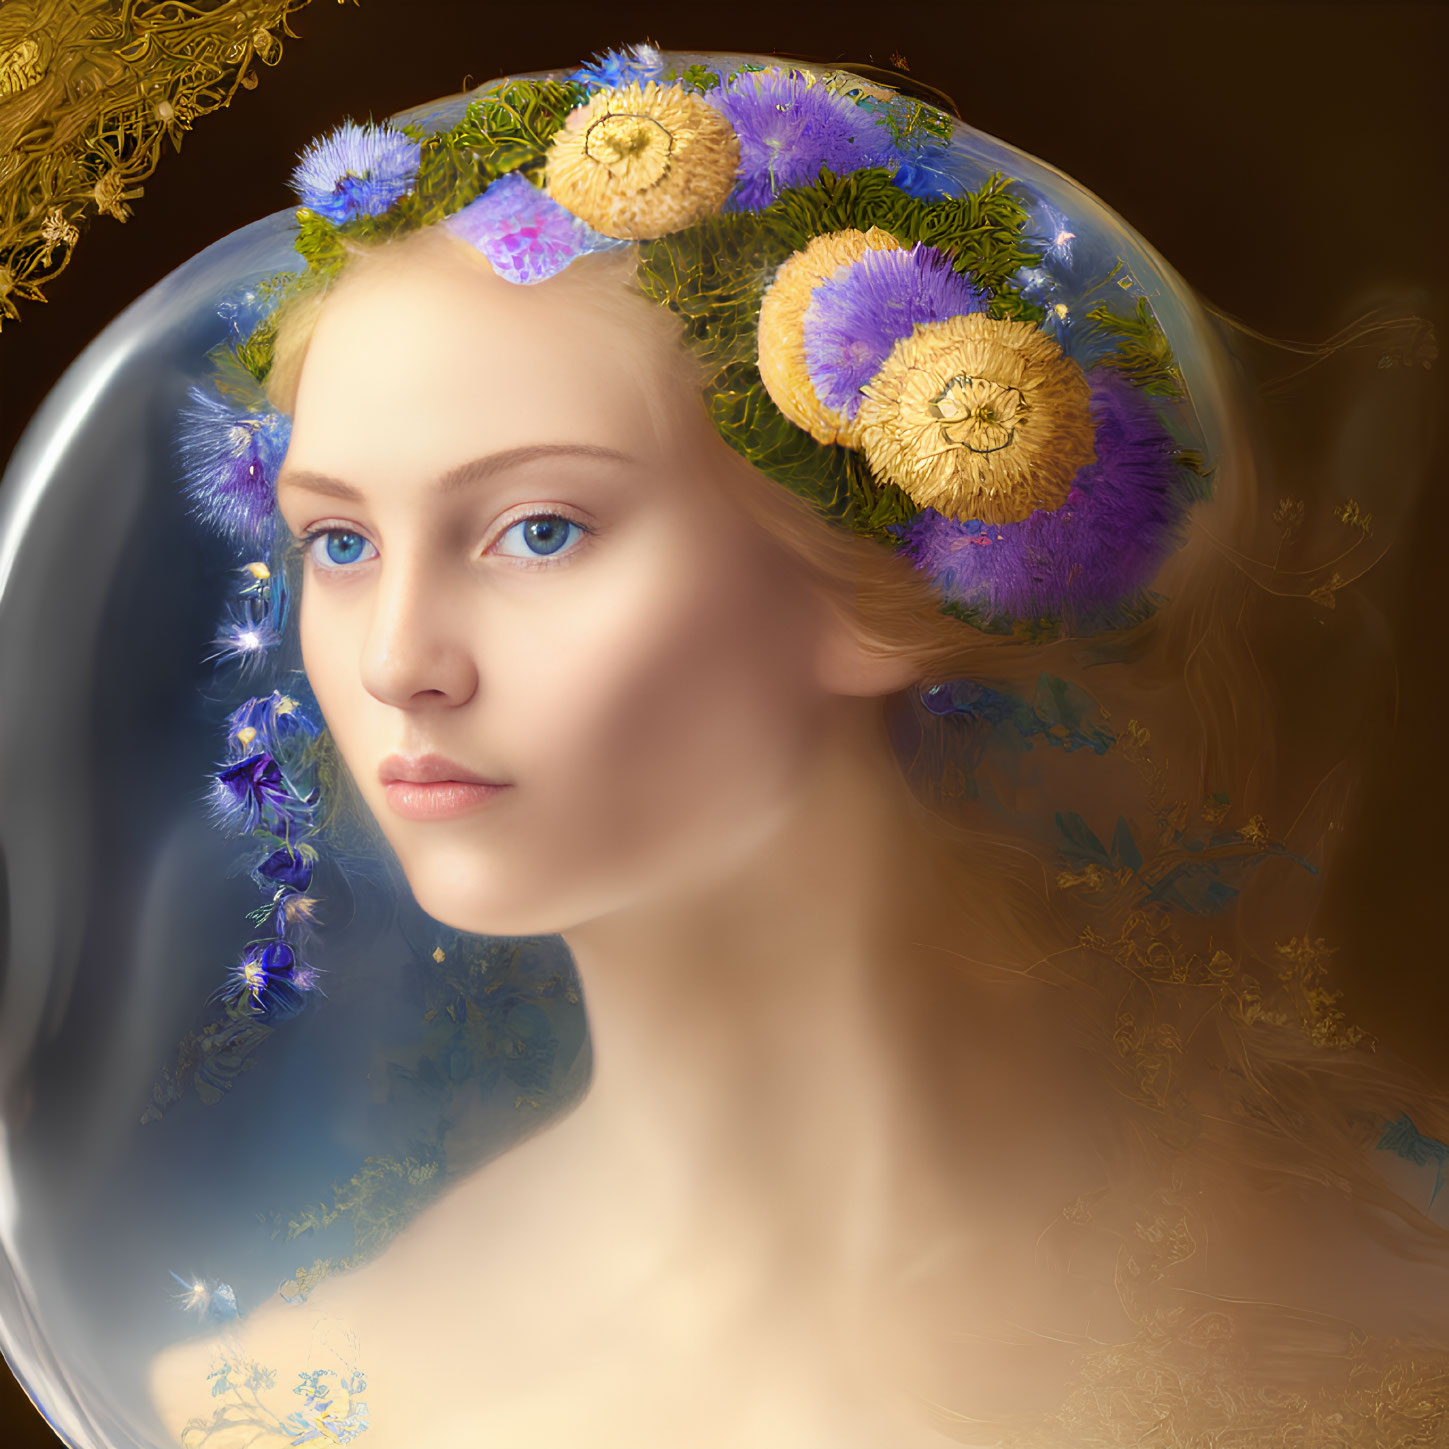 Woman's Portrait with Translucent Floral Halo and Golden Background